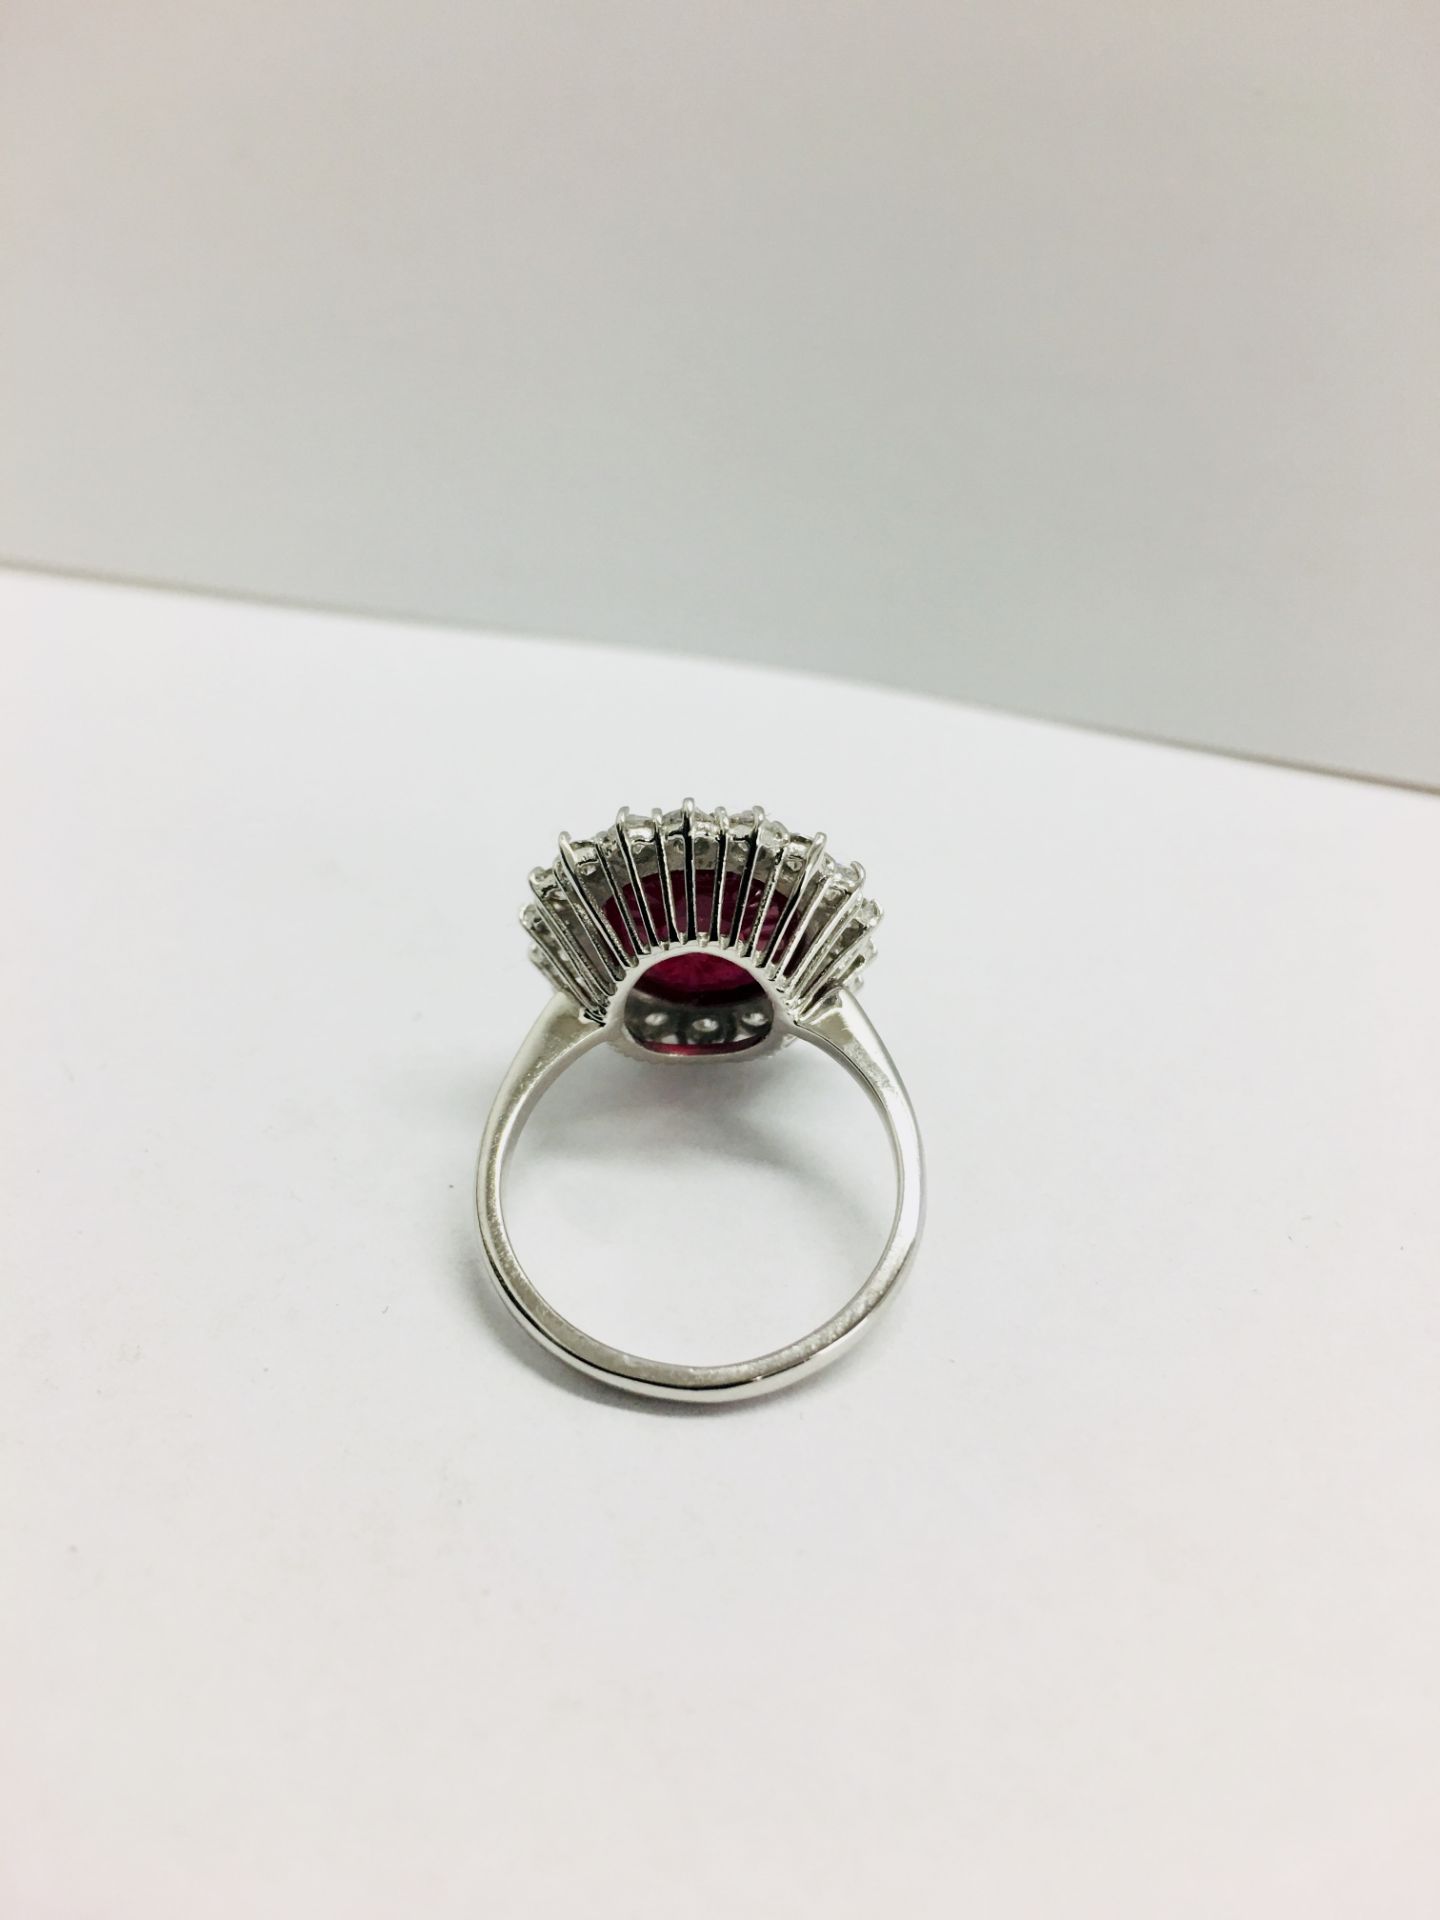 10Ct Ruby And Diamond Cluster Ring. - Image 4 of 6